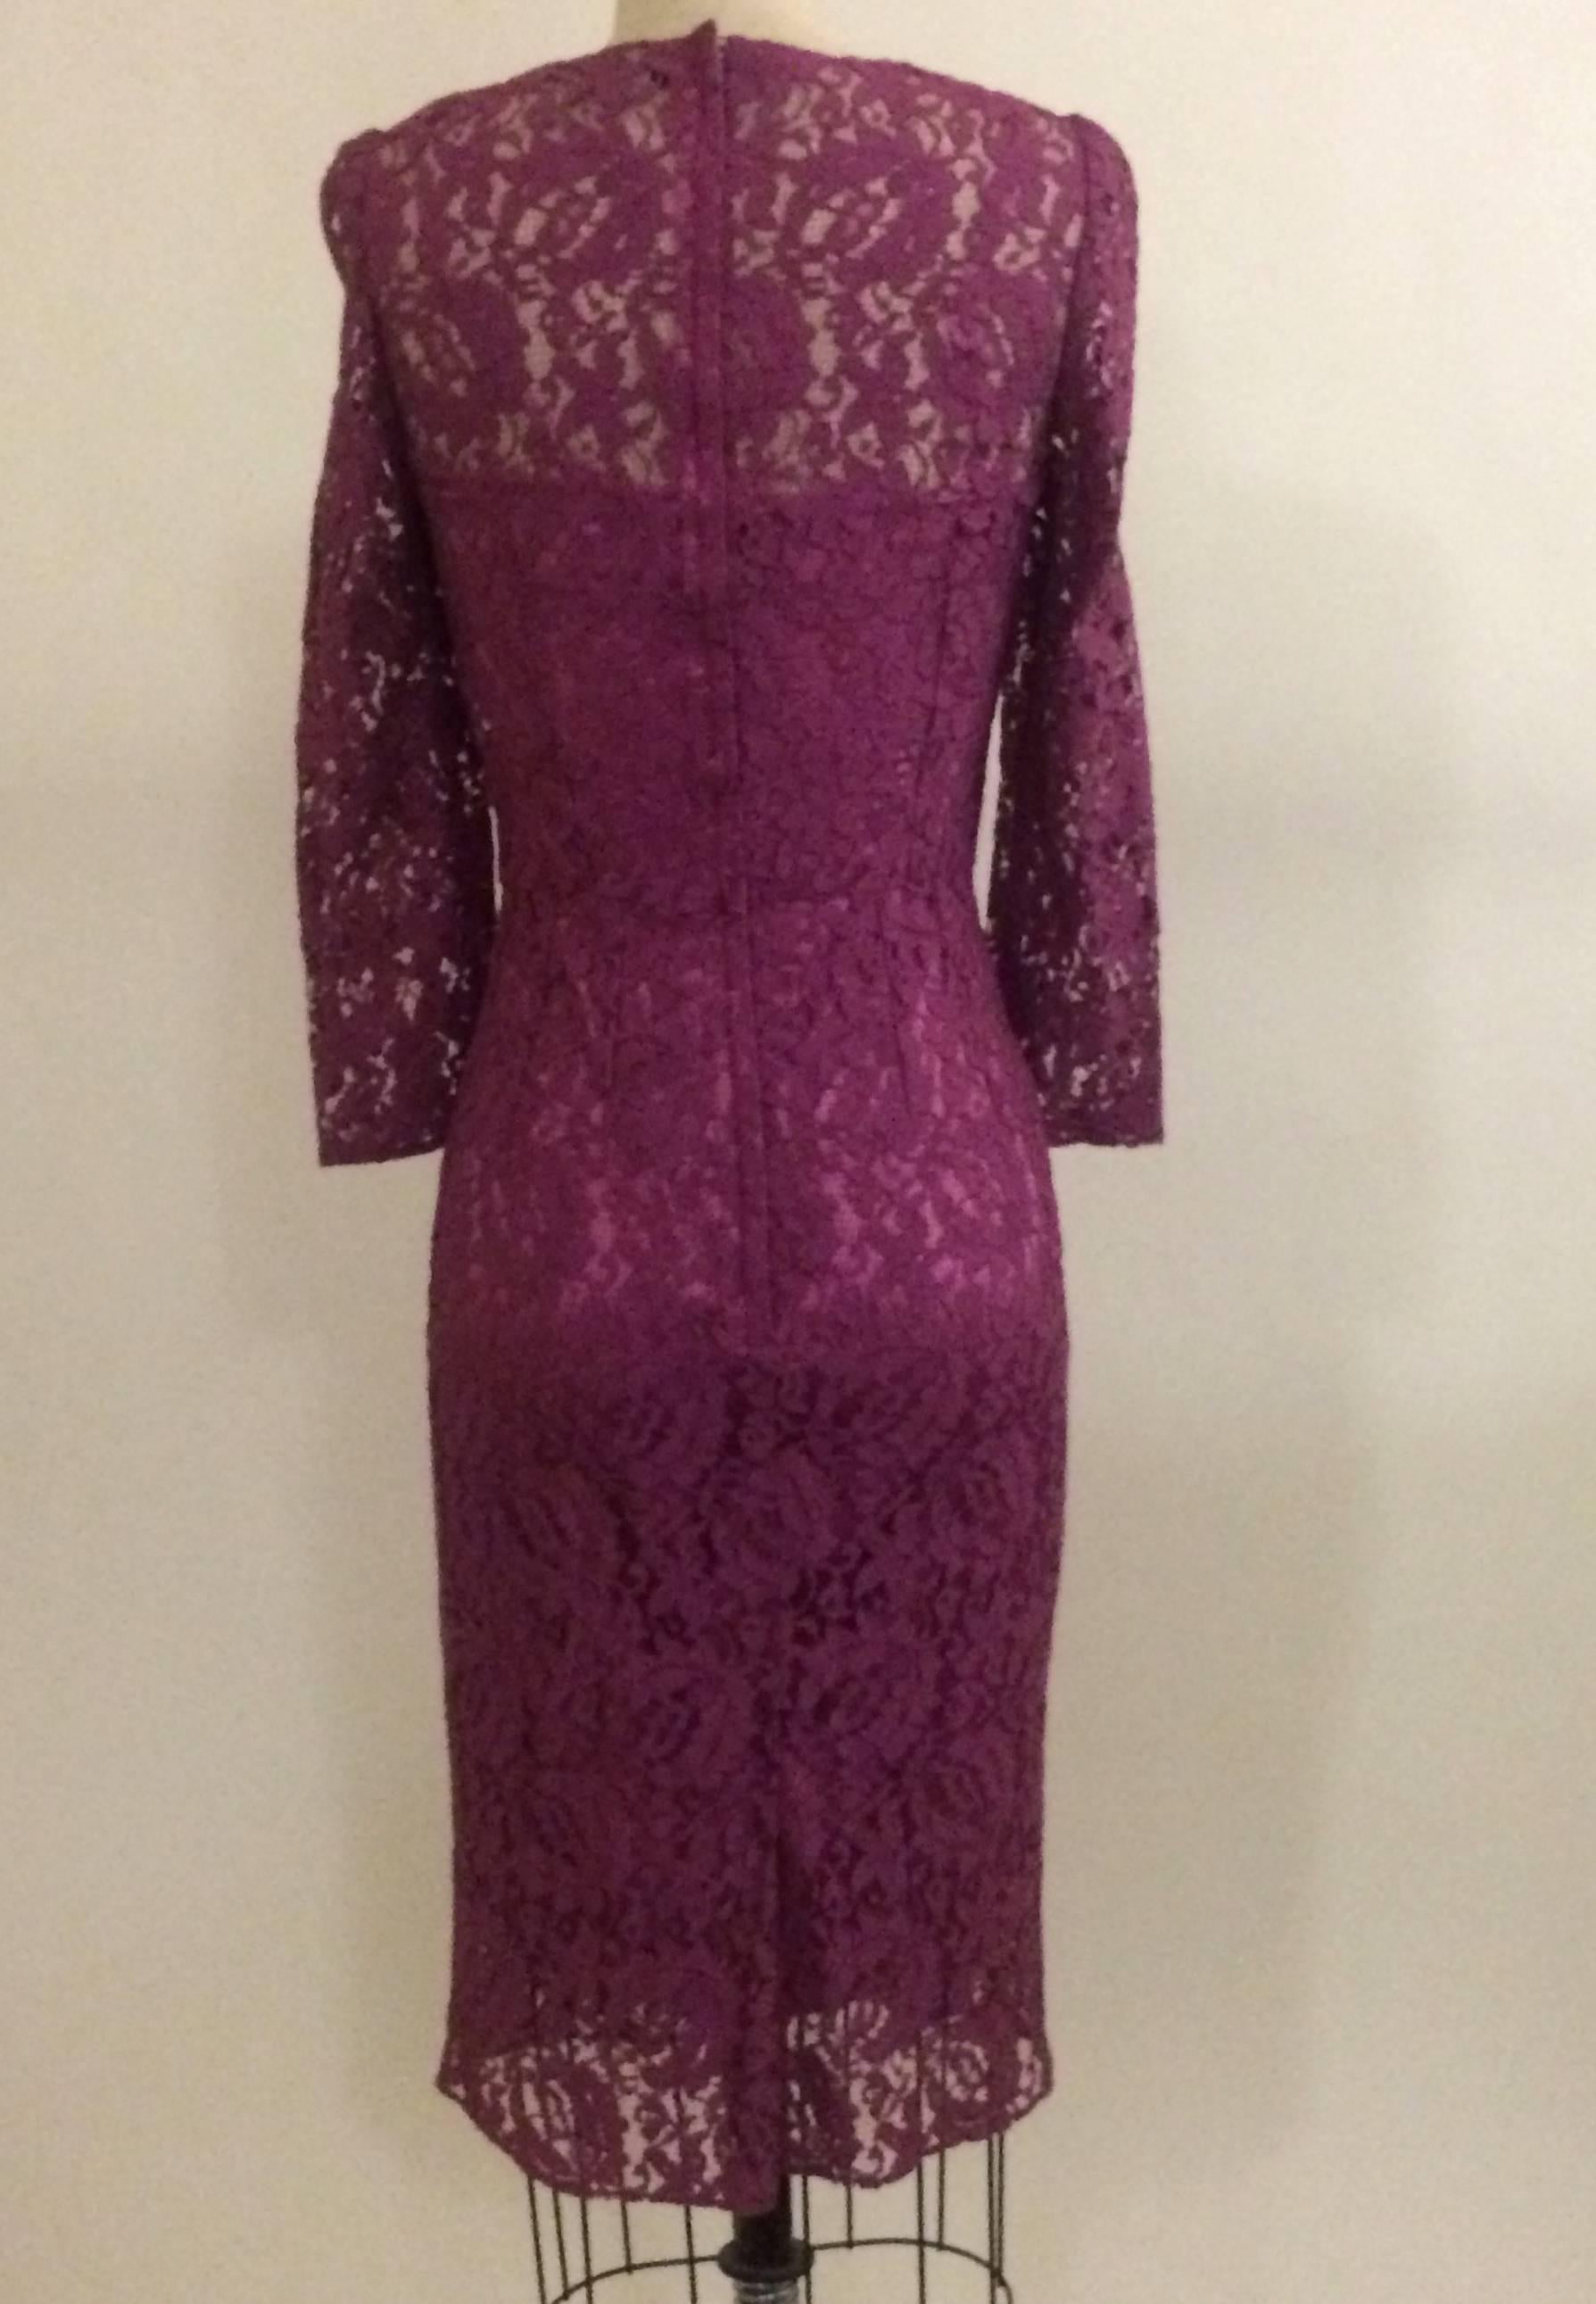 Dolce & Gabbana 3/4 sleeve purple lace fitted dress. Attached silk slip. Hidden back zip and hook.

90% rayon, 10% nylon.
Slip 96% silk, 4% elastane.

Made in Italy, size IT 38, US 2. Runs small, see measurements. 
Measurements taken